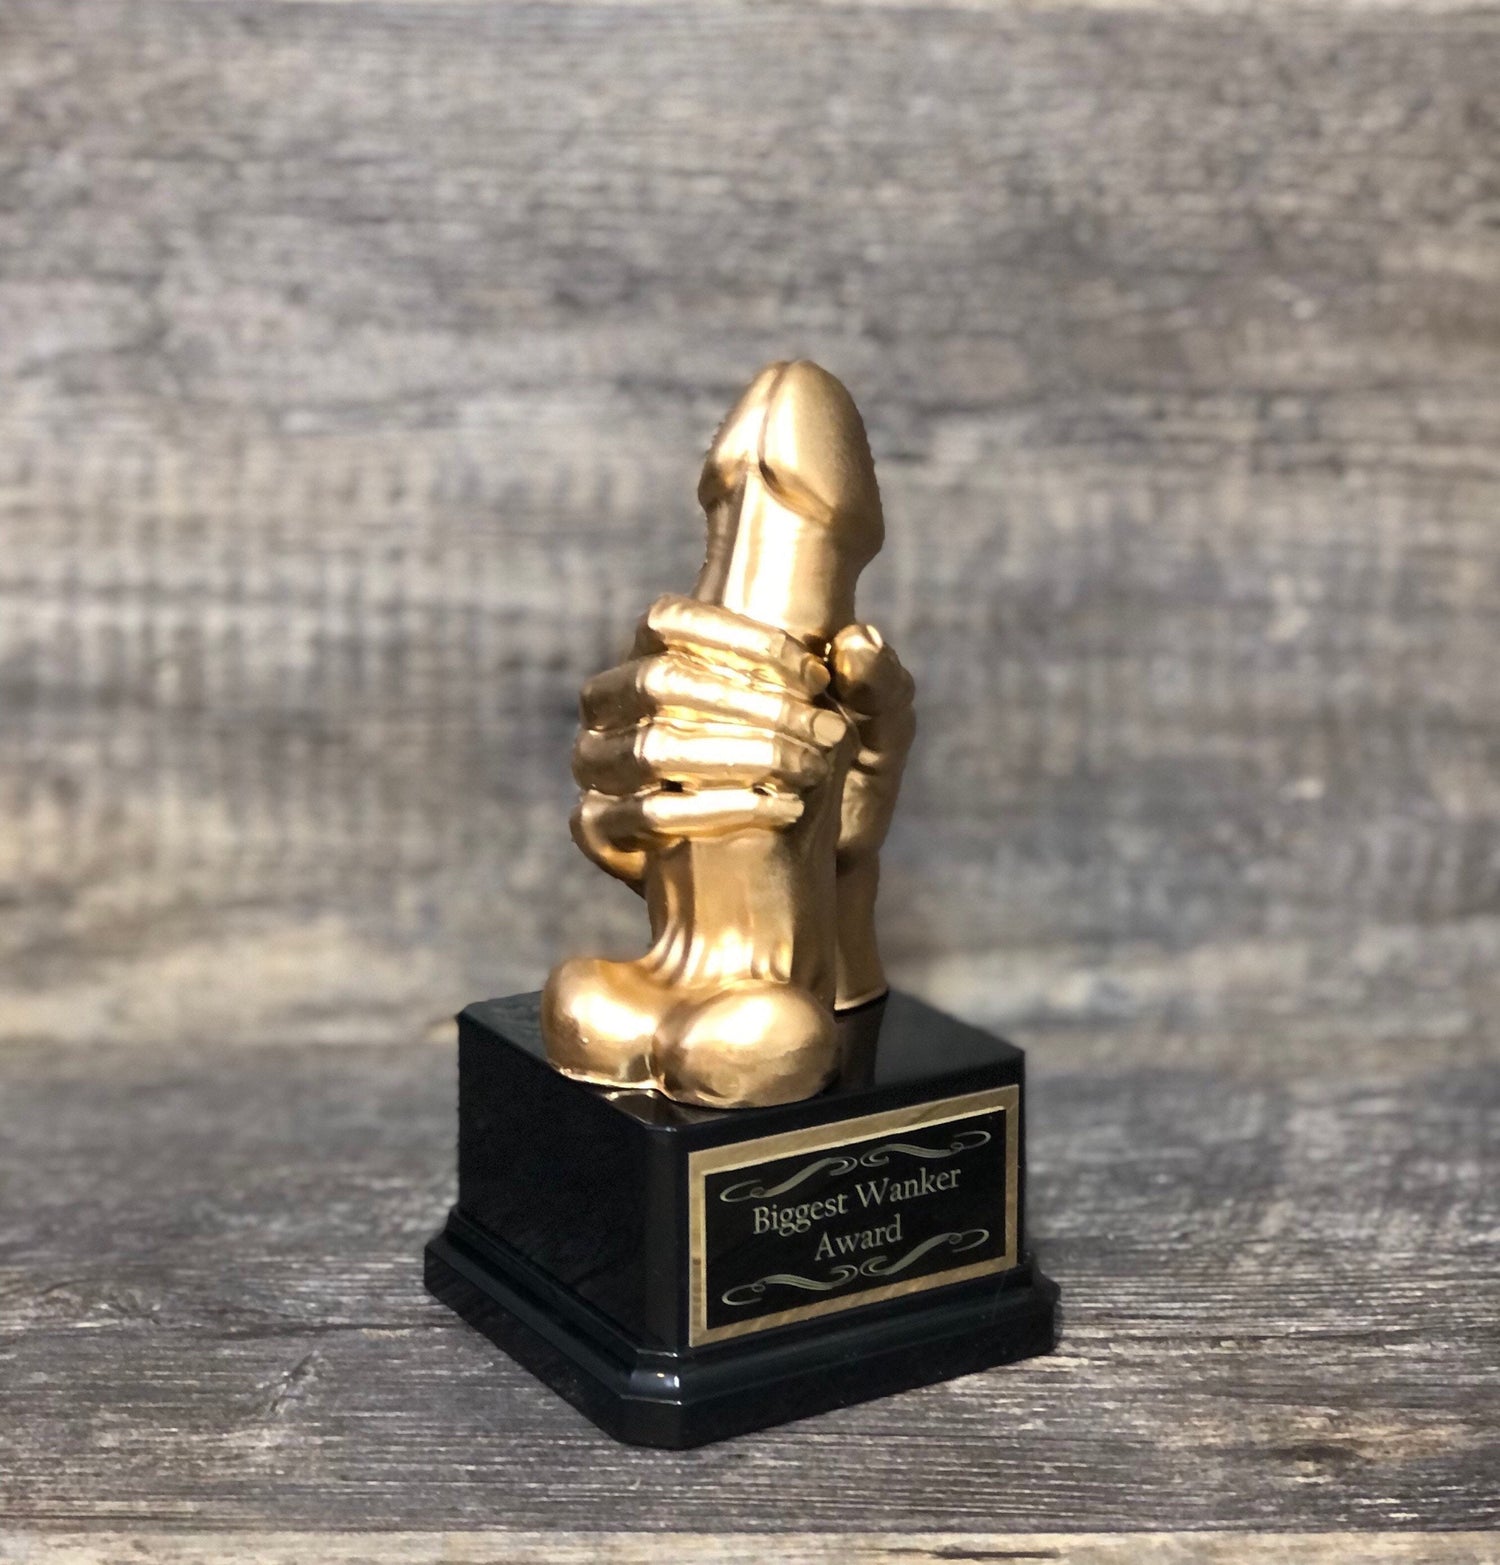 Inappropriate Trophy Penis Trophy WANKER Award Funny Loser Last Place Trophy Adult Humor Gag Gift Golden Testicle Birthday Gift